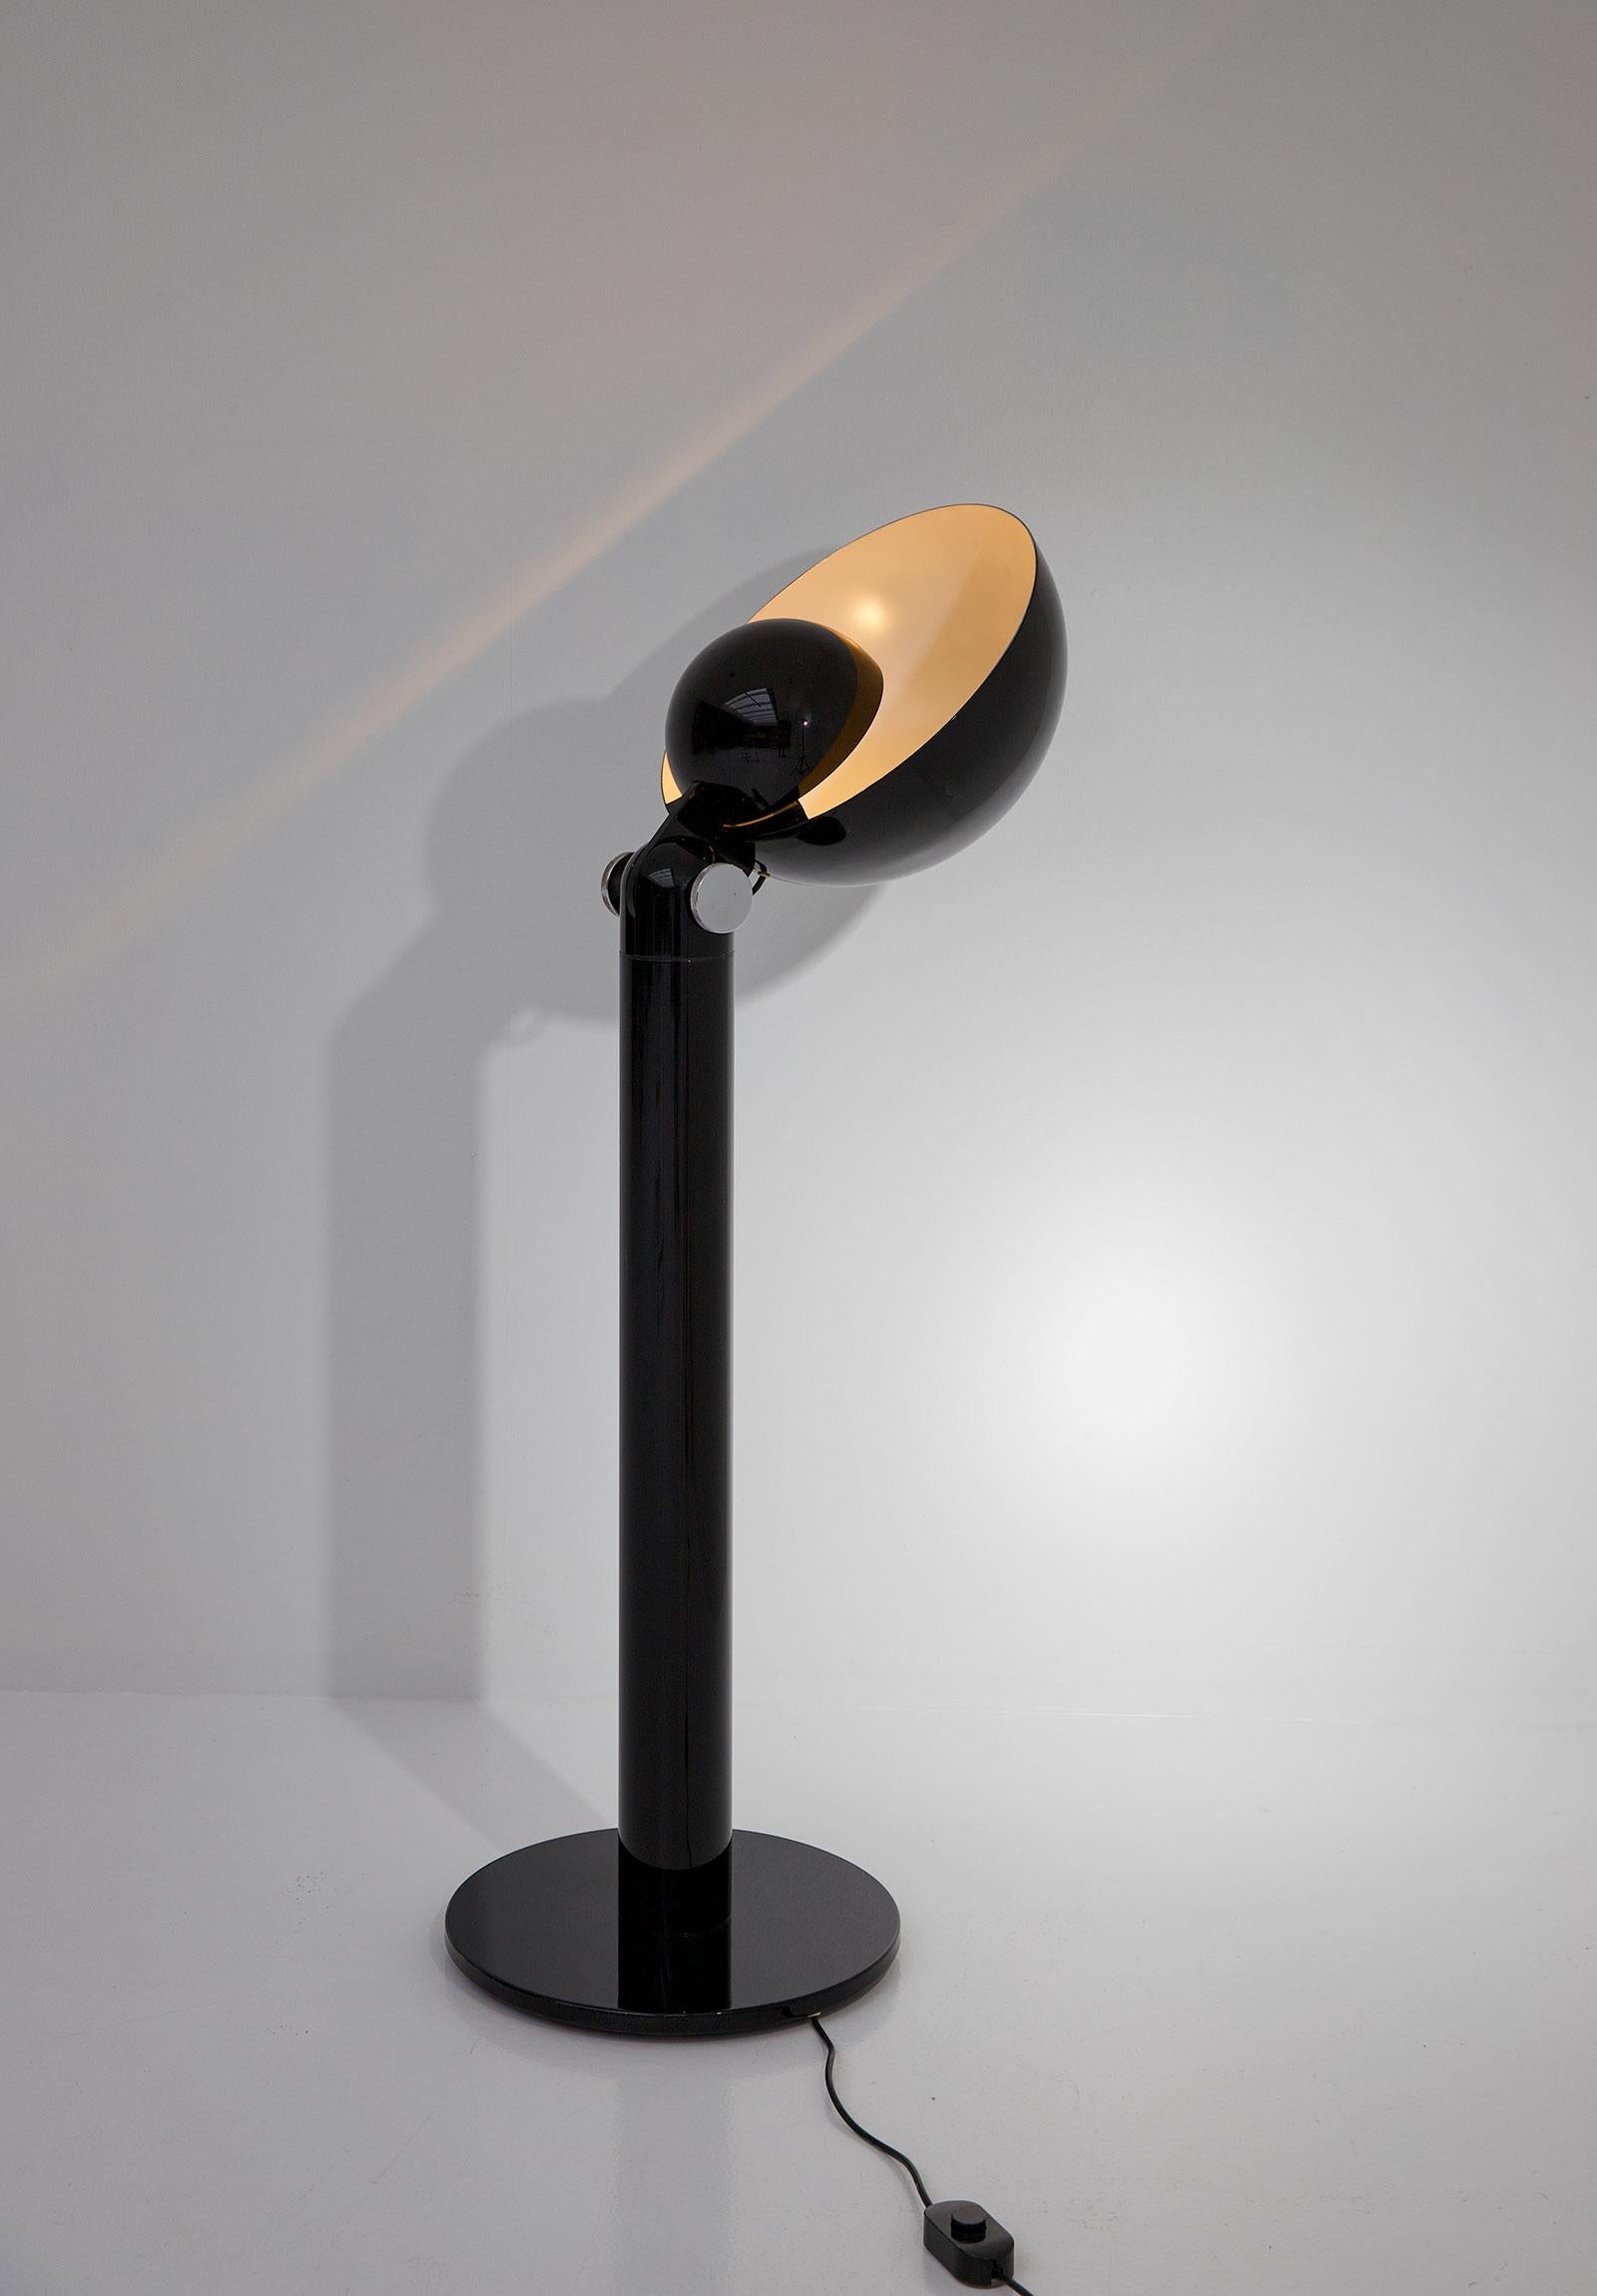 Cuffia floor lamp black edition designed by Francesco Buzzi for Bieffeplast in 1969. This postmodern lamp is made out of black lacquered aluminum with two adjustable shades who can turn 180 degrees. The use of the two shades gives the lamp a highly